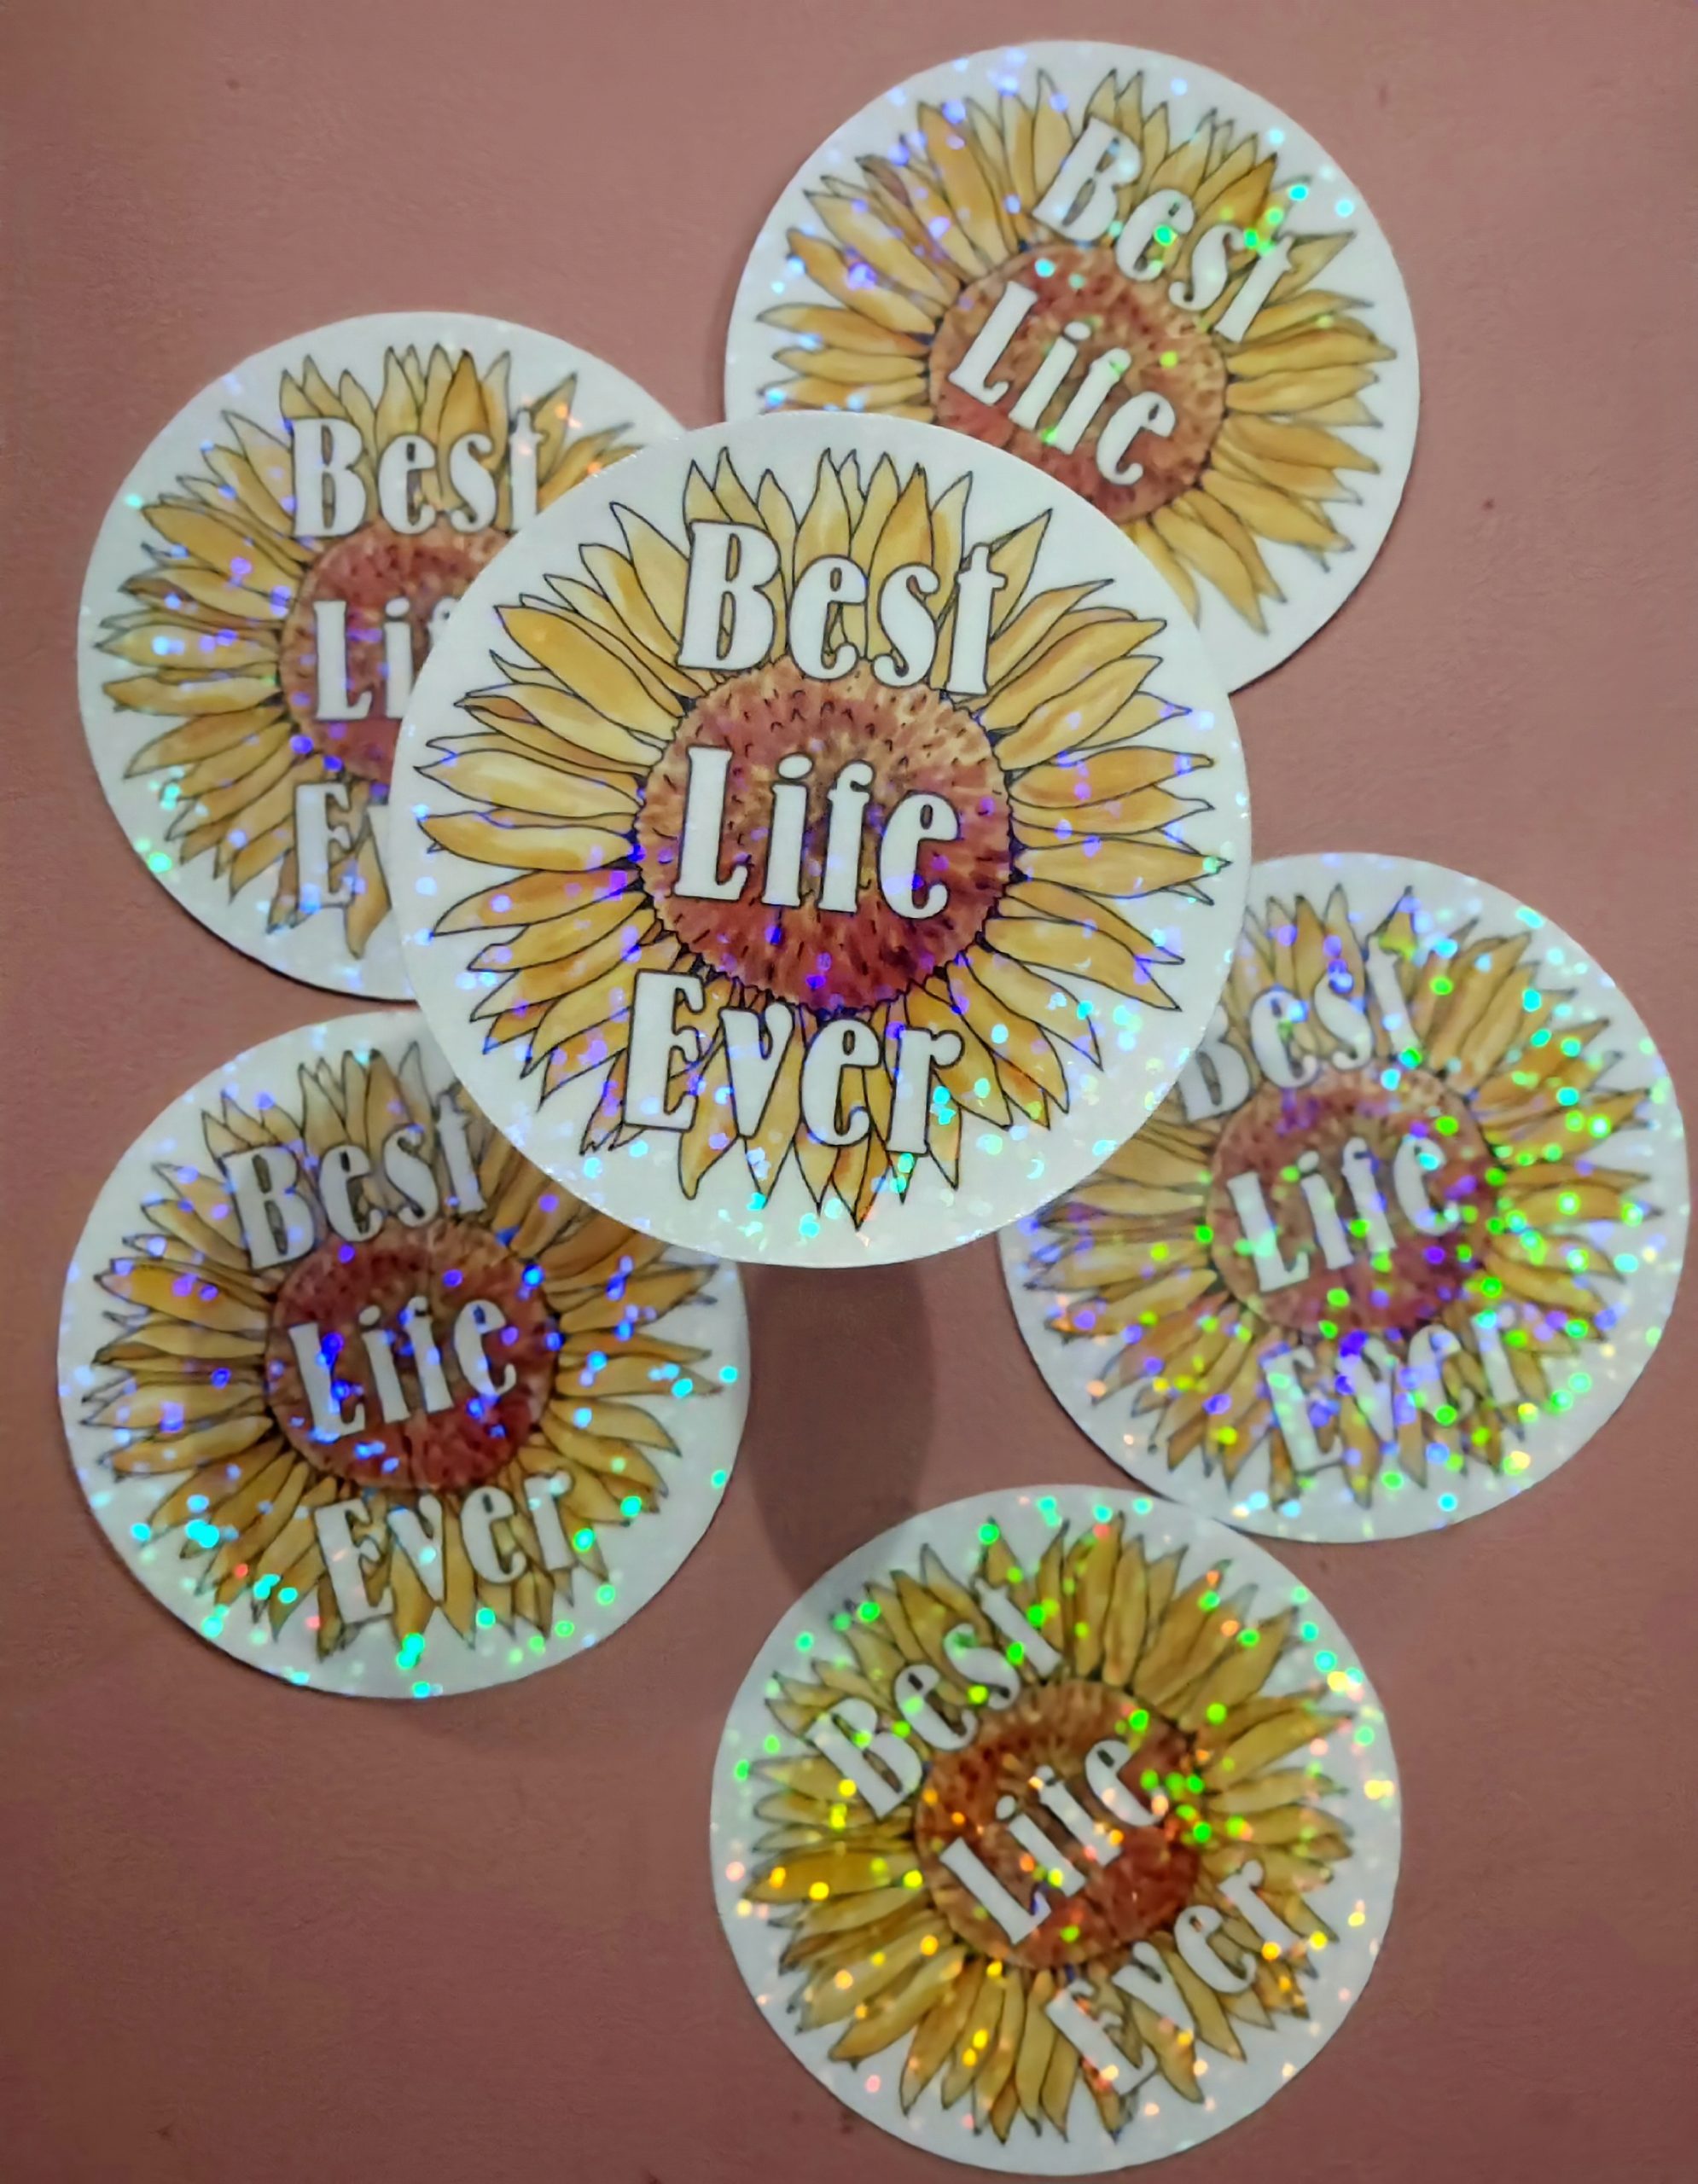 VINYL STICKER Study Girl Curly Girl Puff - The Best Life Ever Shop